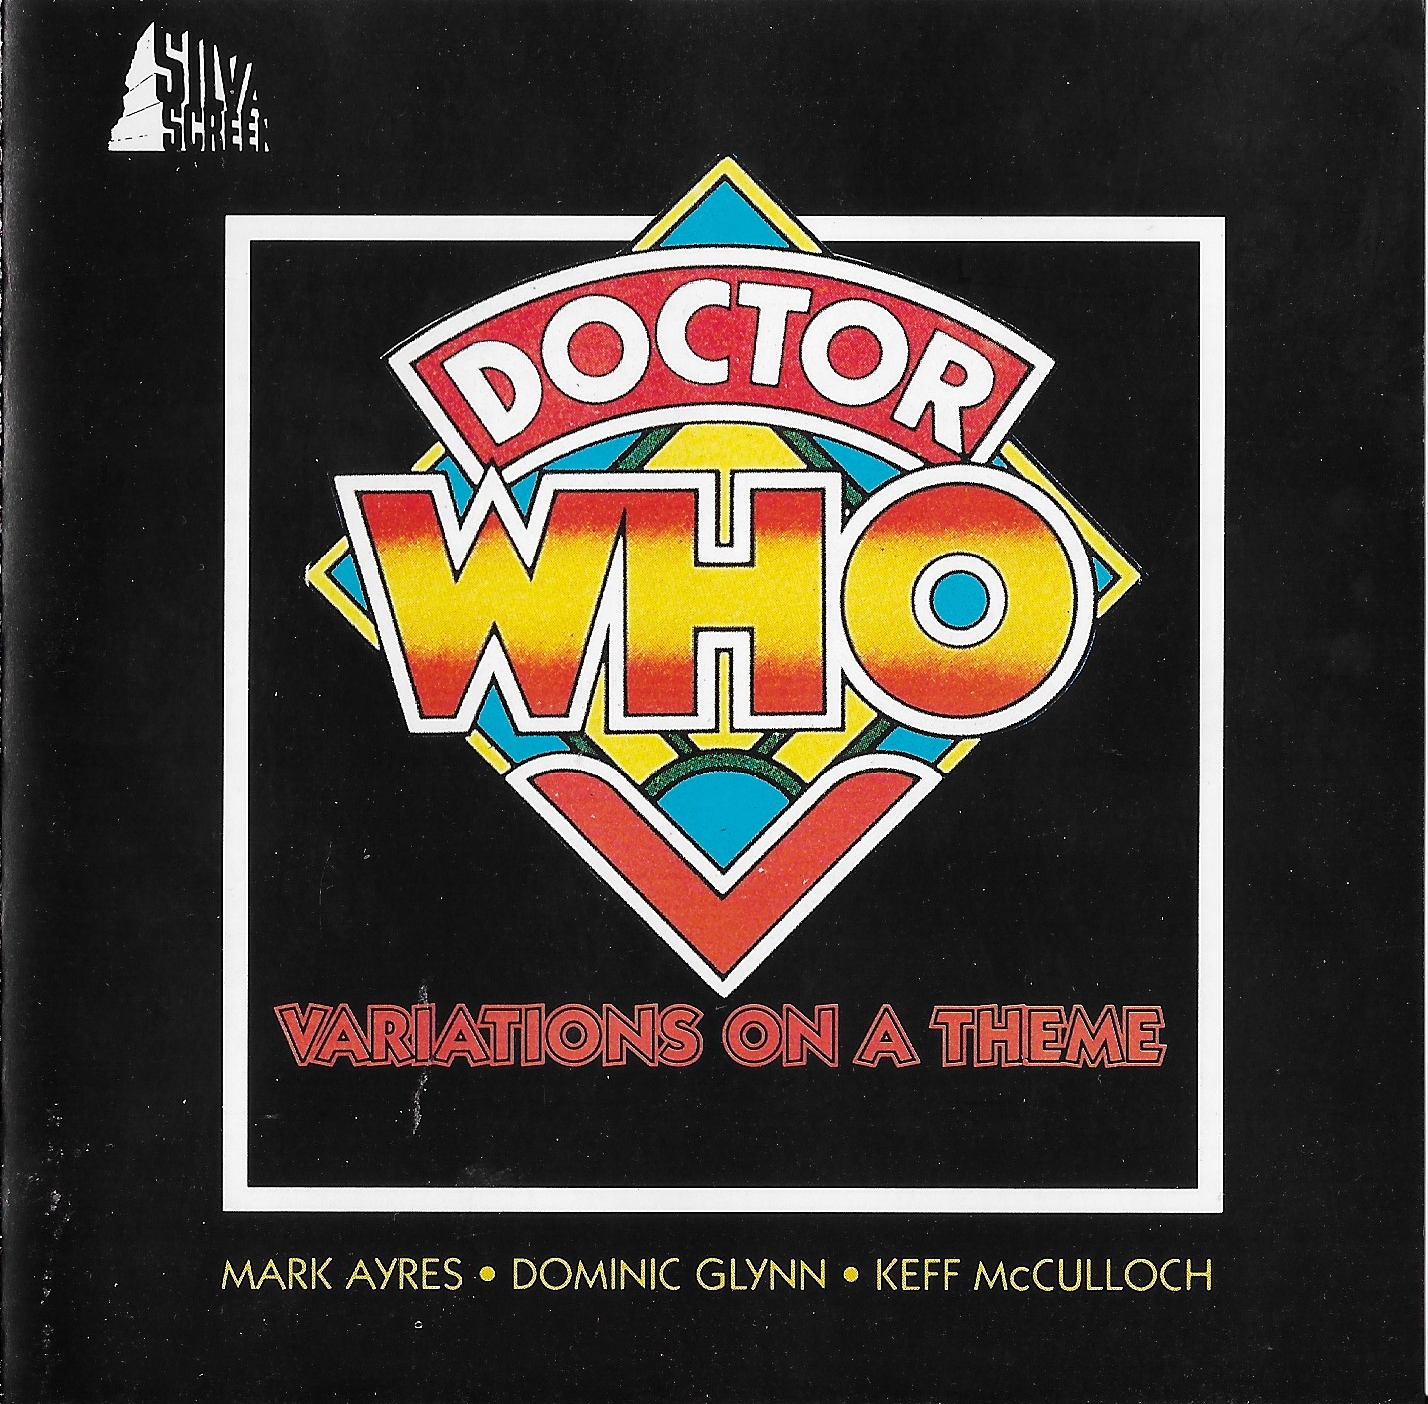 Picture of FILMCD 706 Doctor Who - Variations on a theme by artist Ron Grainer from the BBC records and Tapes library